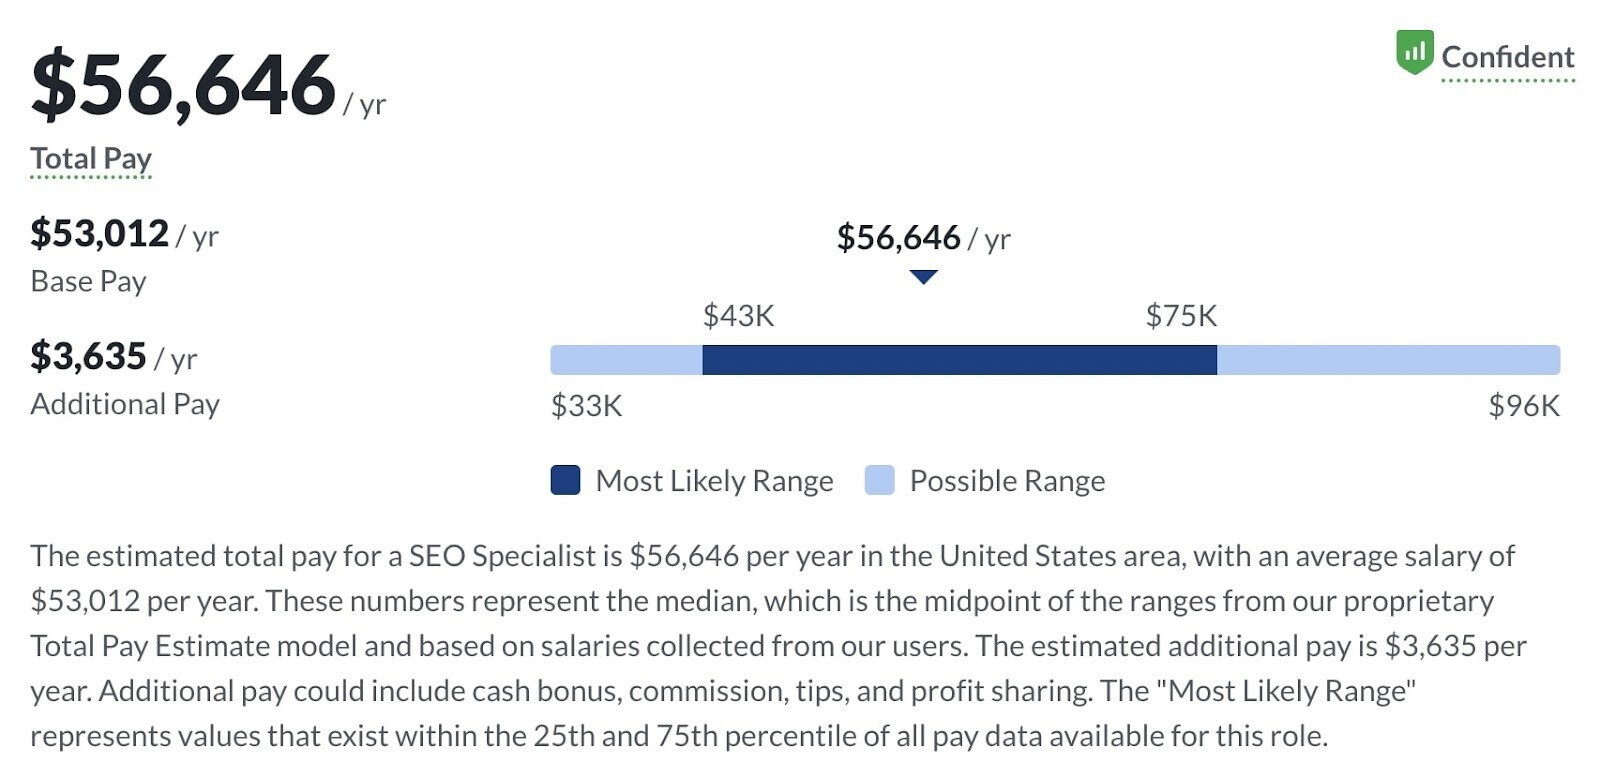 Glassdoor lists salary for SEO professionals at around $56,653